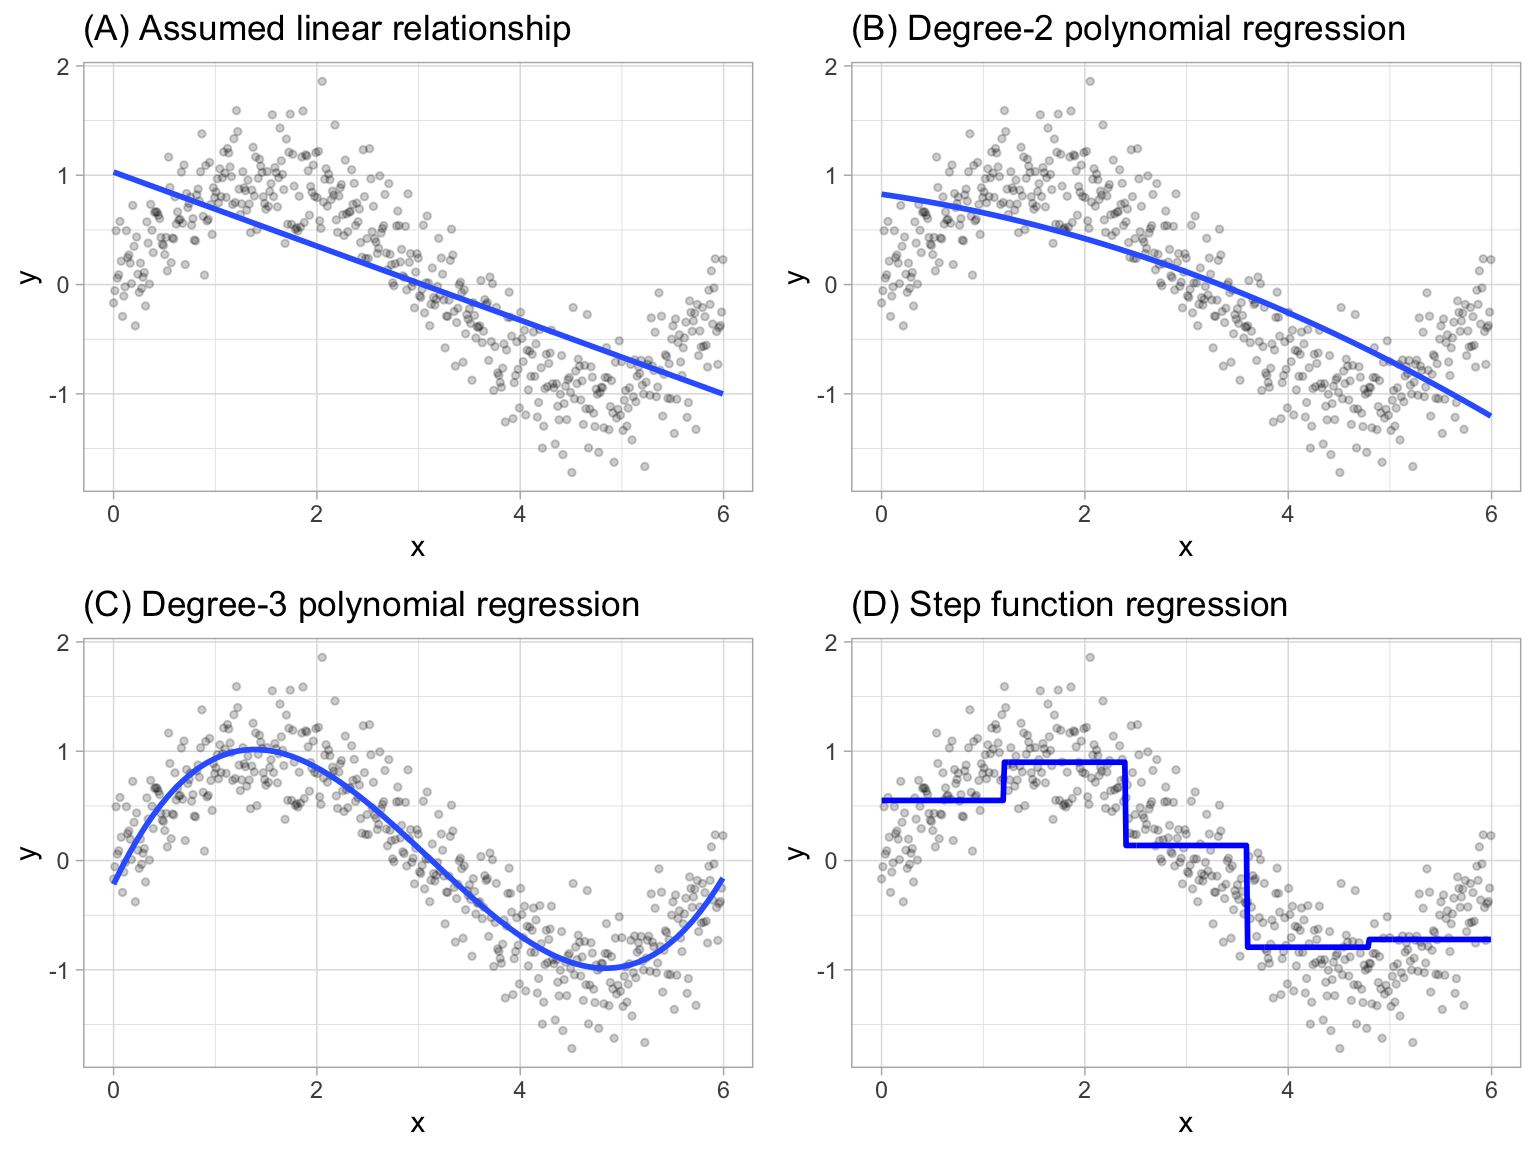 Blue line represents predicted (`y`) values as a function of `x` for alternative approaches to modeling explicit nonlinear regression patterns. (A) Traditional linear regression approach does not capture any nonlinearity unless the predictor or response is transformed (i.e. log transformation). (B) Degree-2 polynomial, (C) Degree-3 polynomial, (D) Step function cutting `x` into six categorical levels.